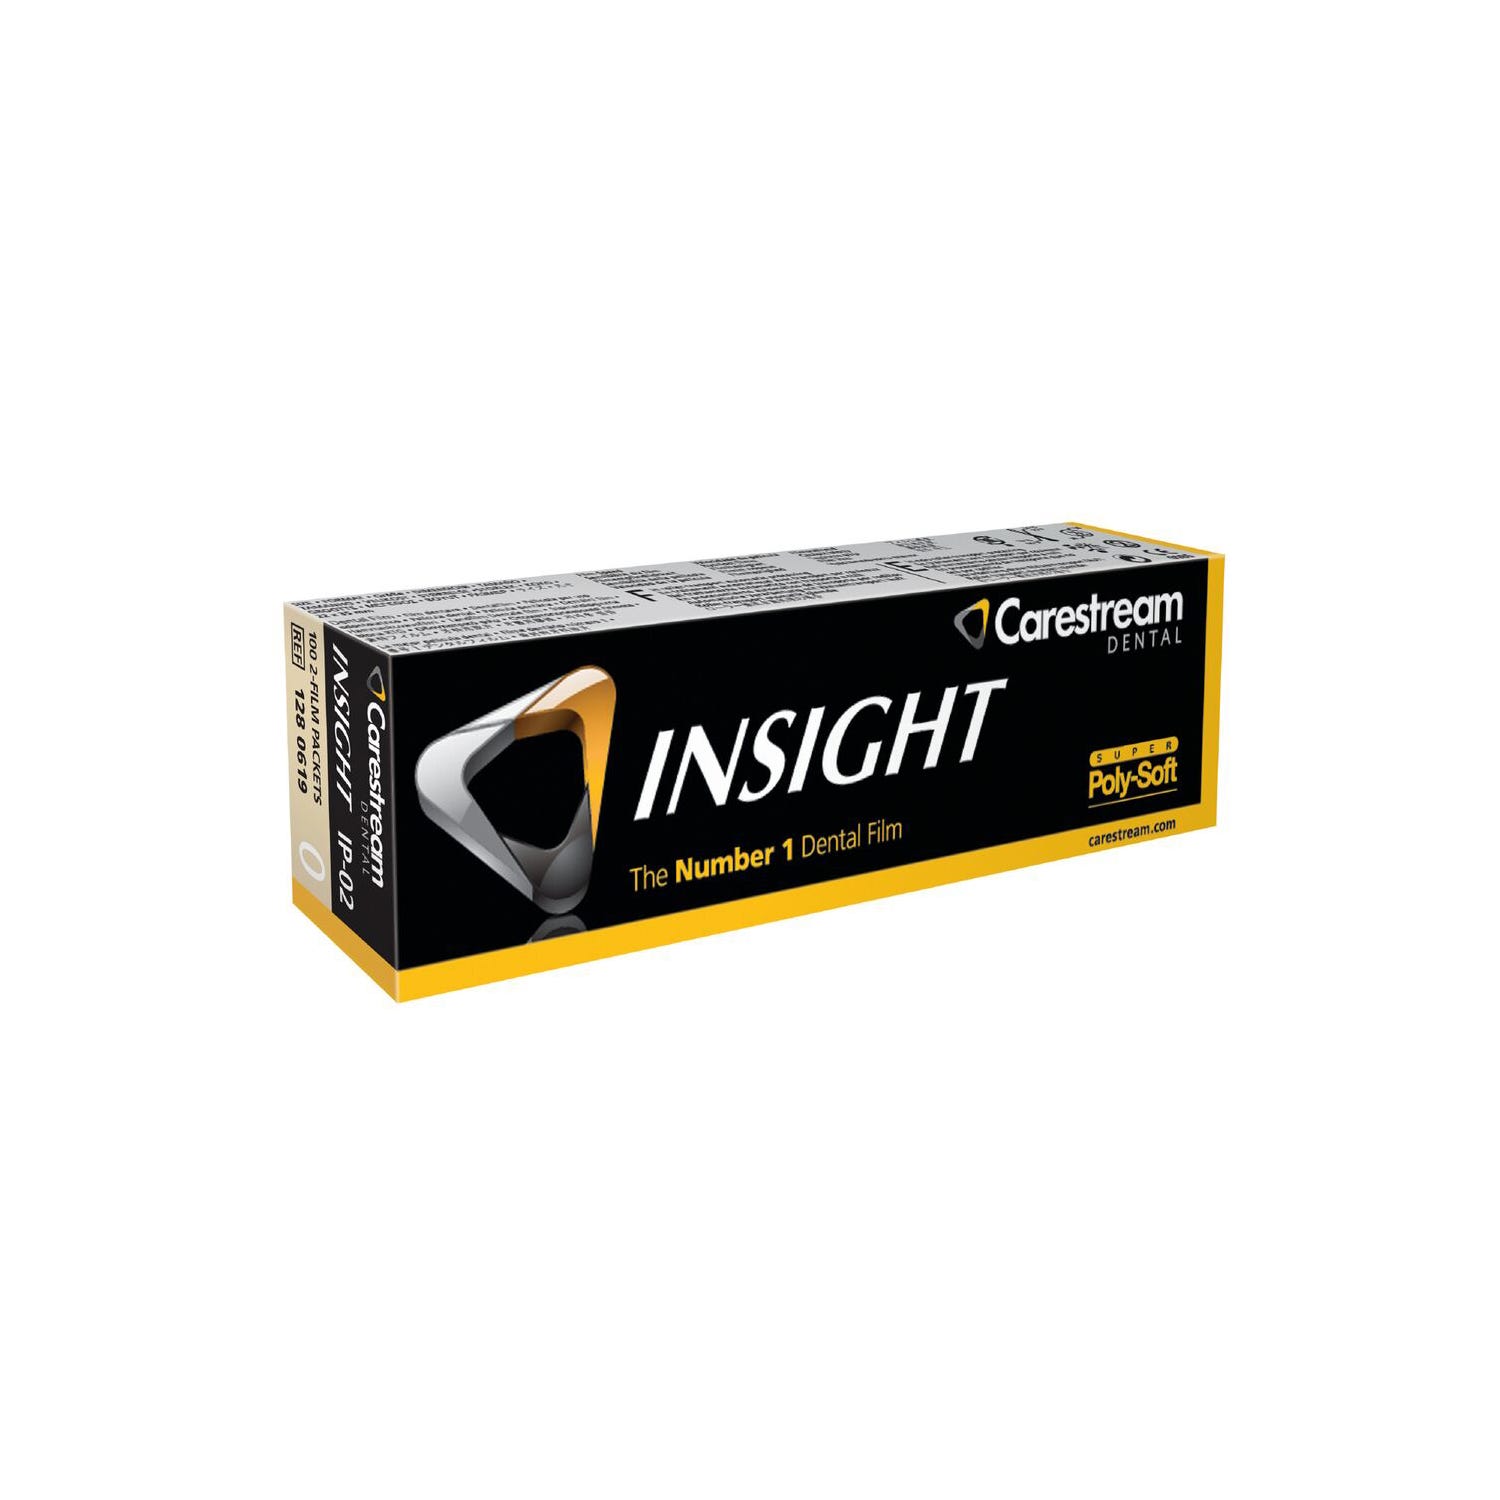 INSIGHT™ Dental Film, Size 0, IP-02, Super Poly-Soft™ Packets (Double Film) - 100/Box